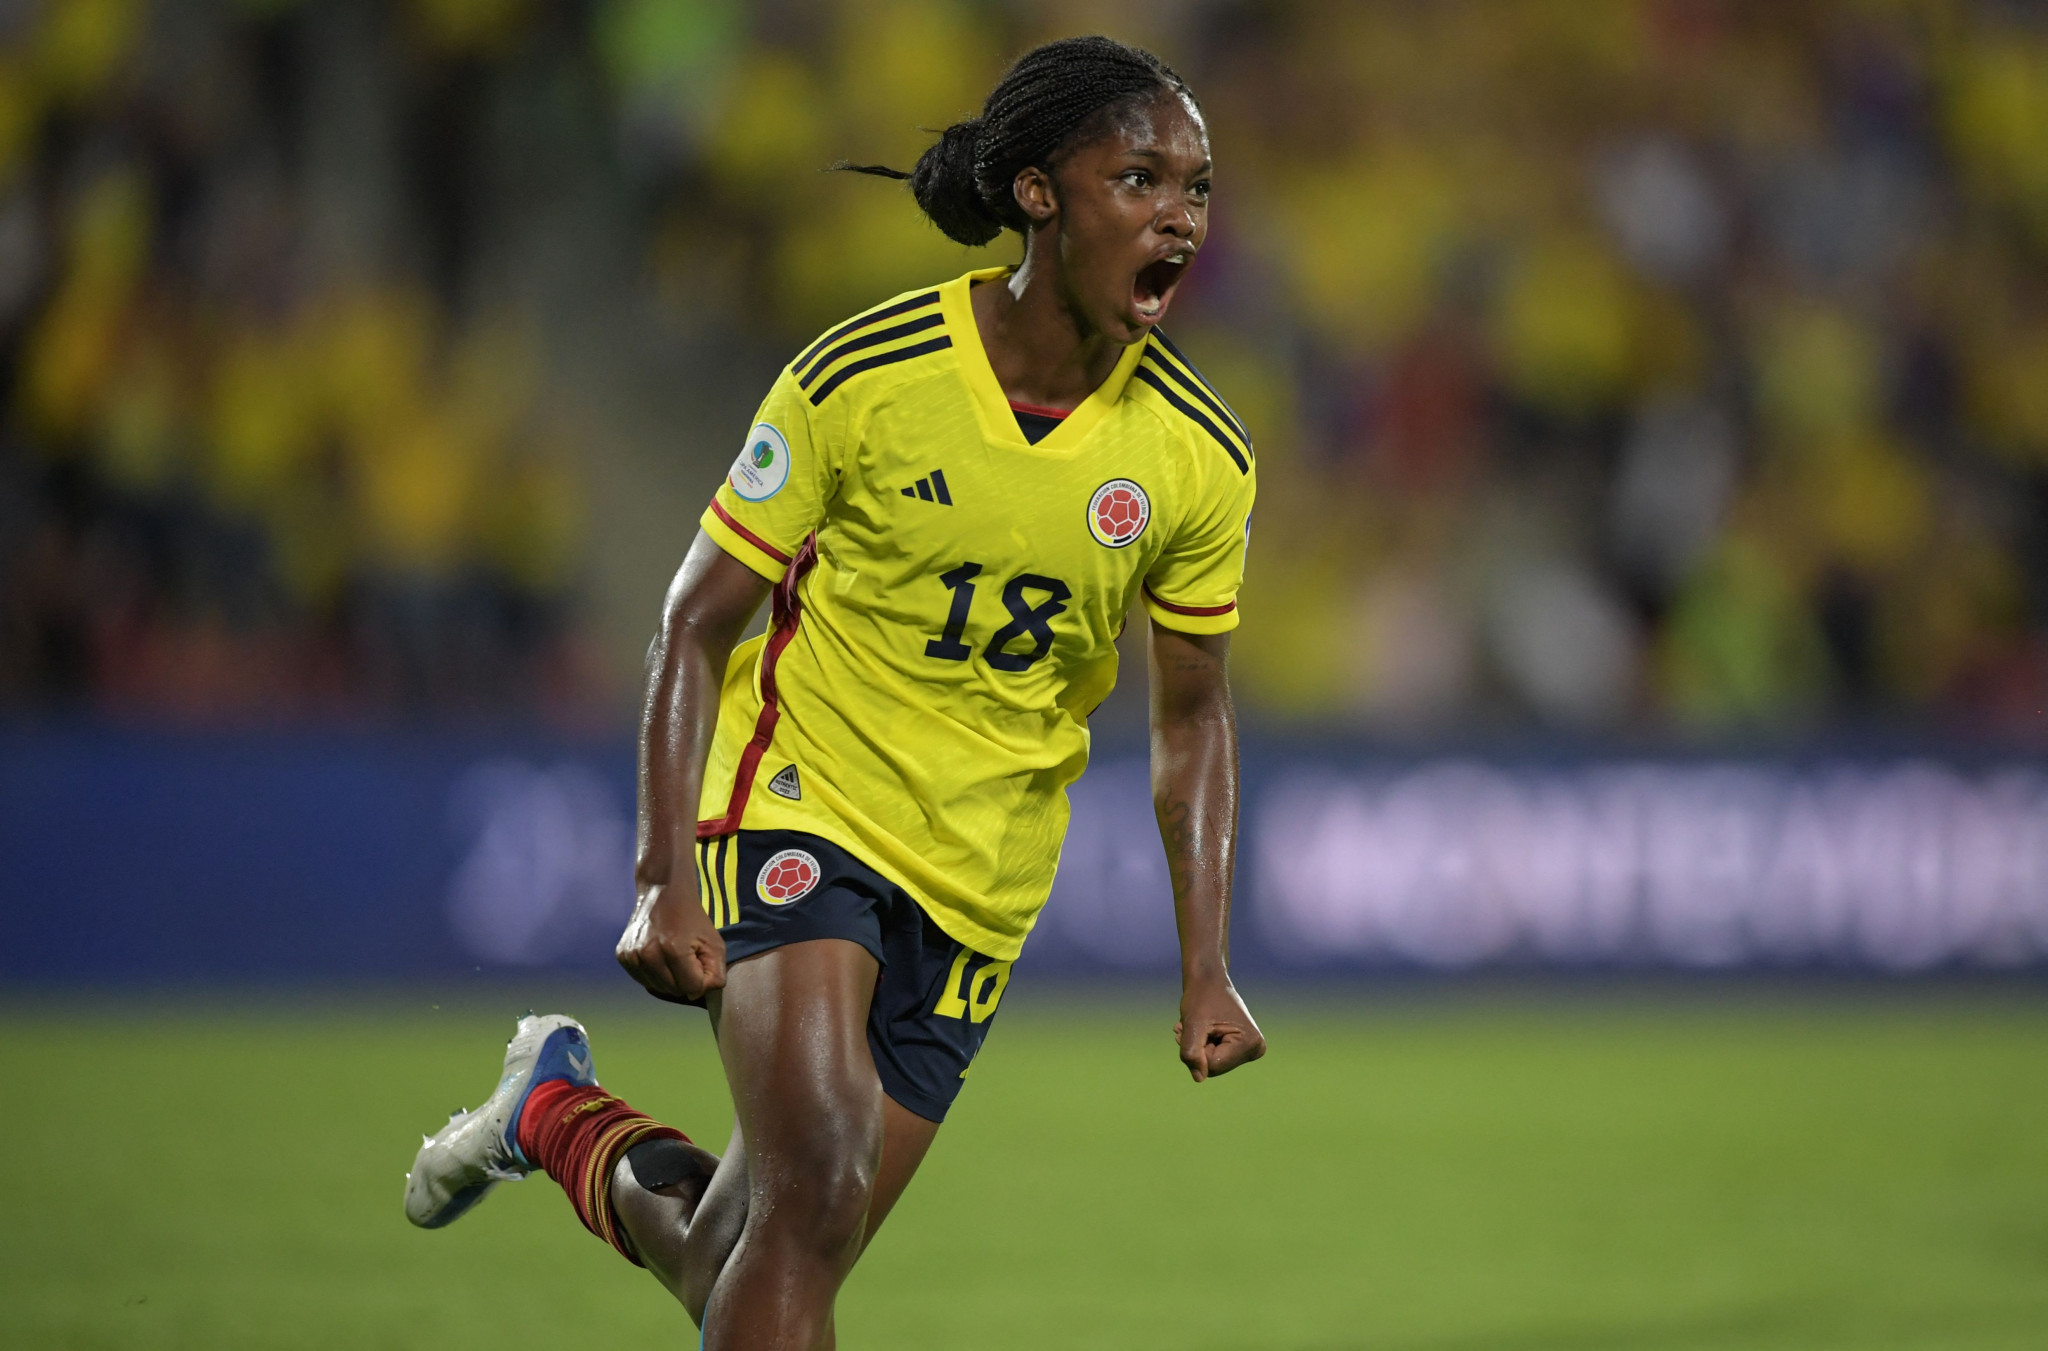 Linda Caicedo scored the winner as Colombia reached the final of the Copa America Femenina ©Getty Images